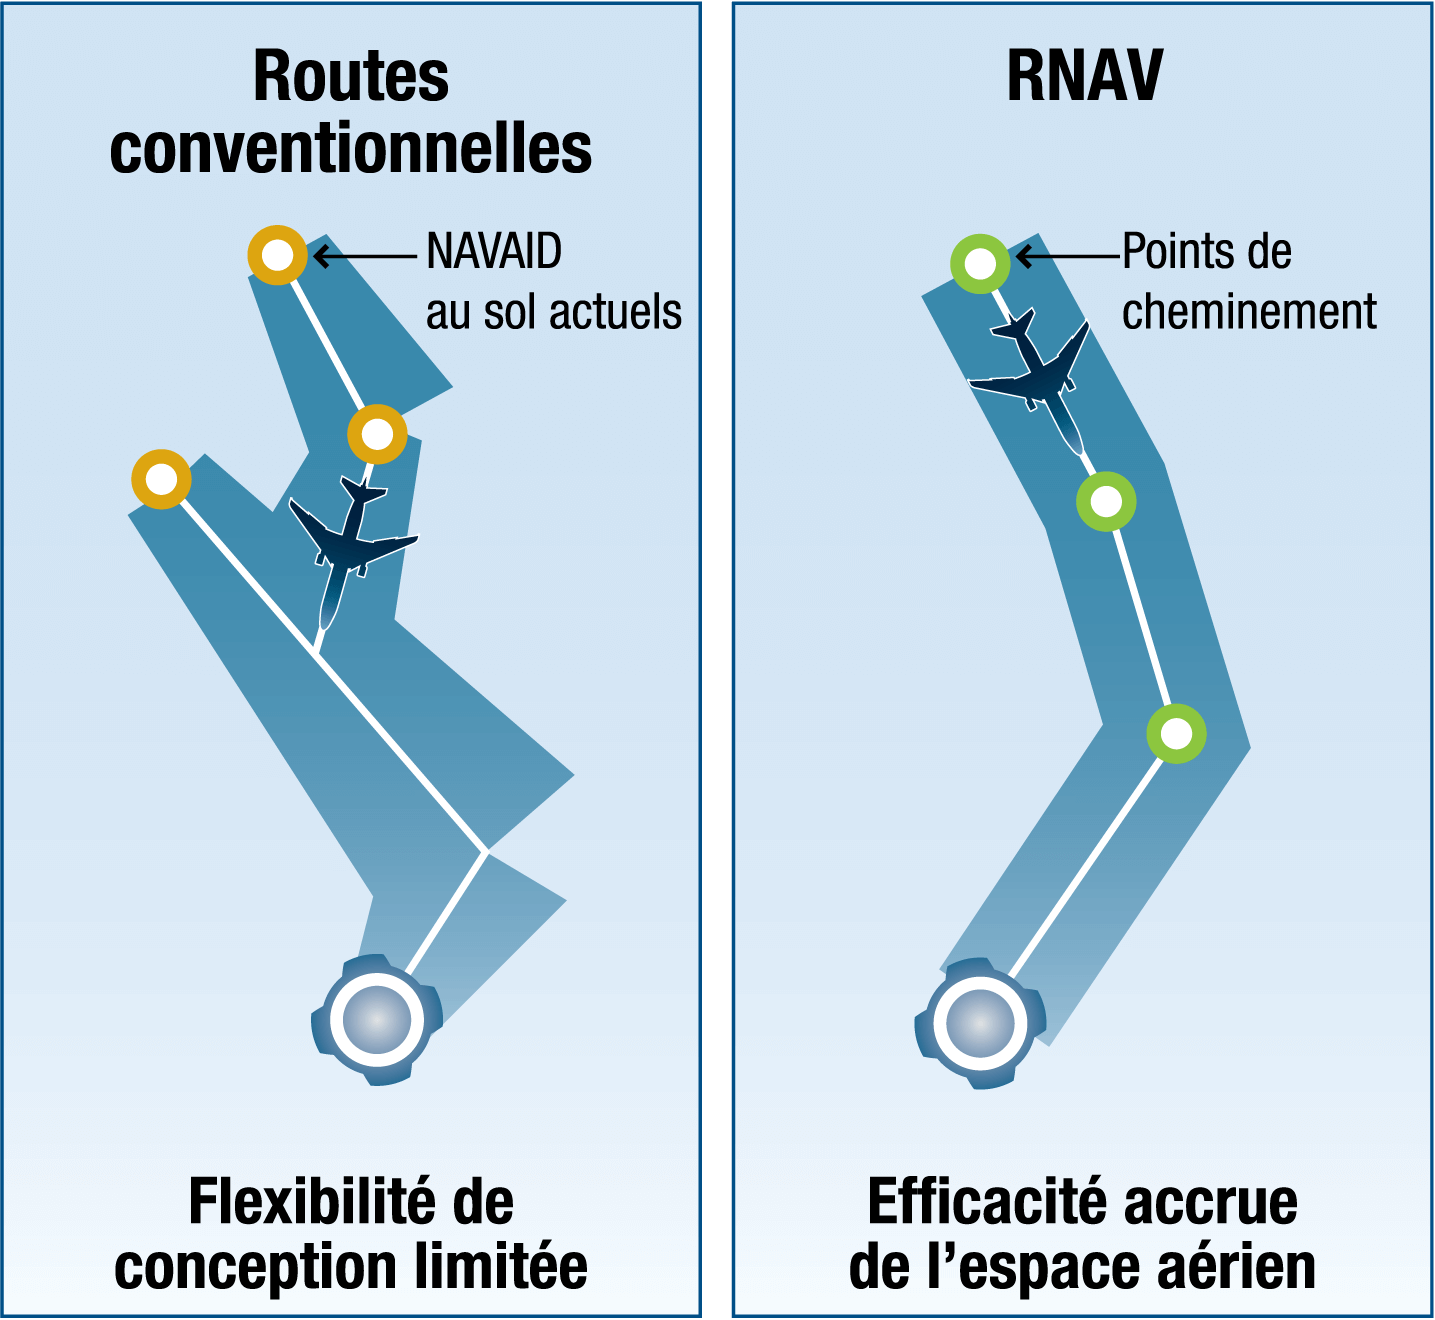 Conventional routes offer limited design flexibility, whereas RNAV provides increased airspace efficiency